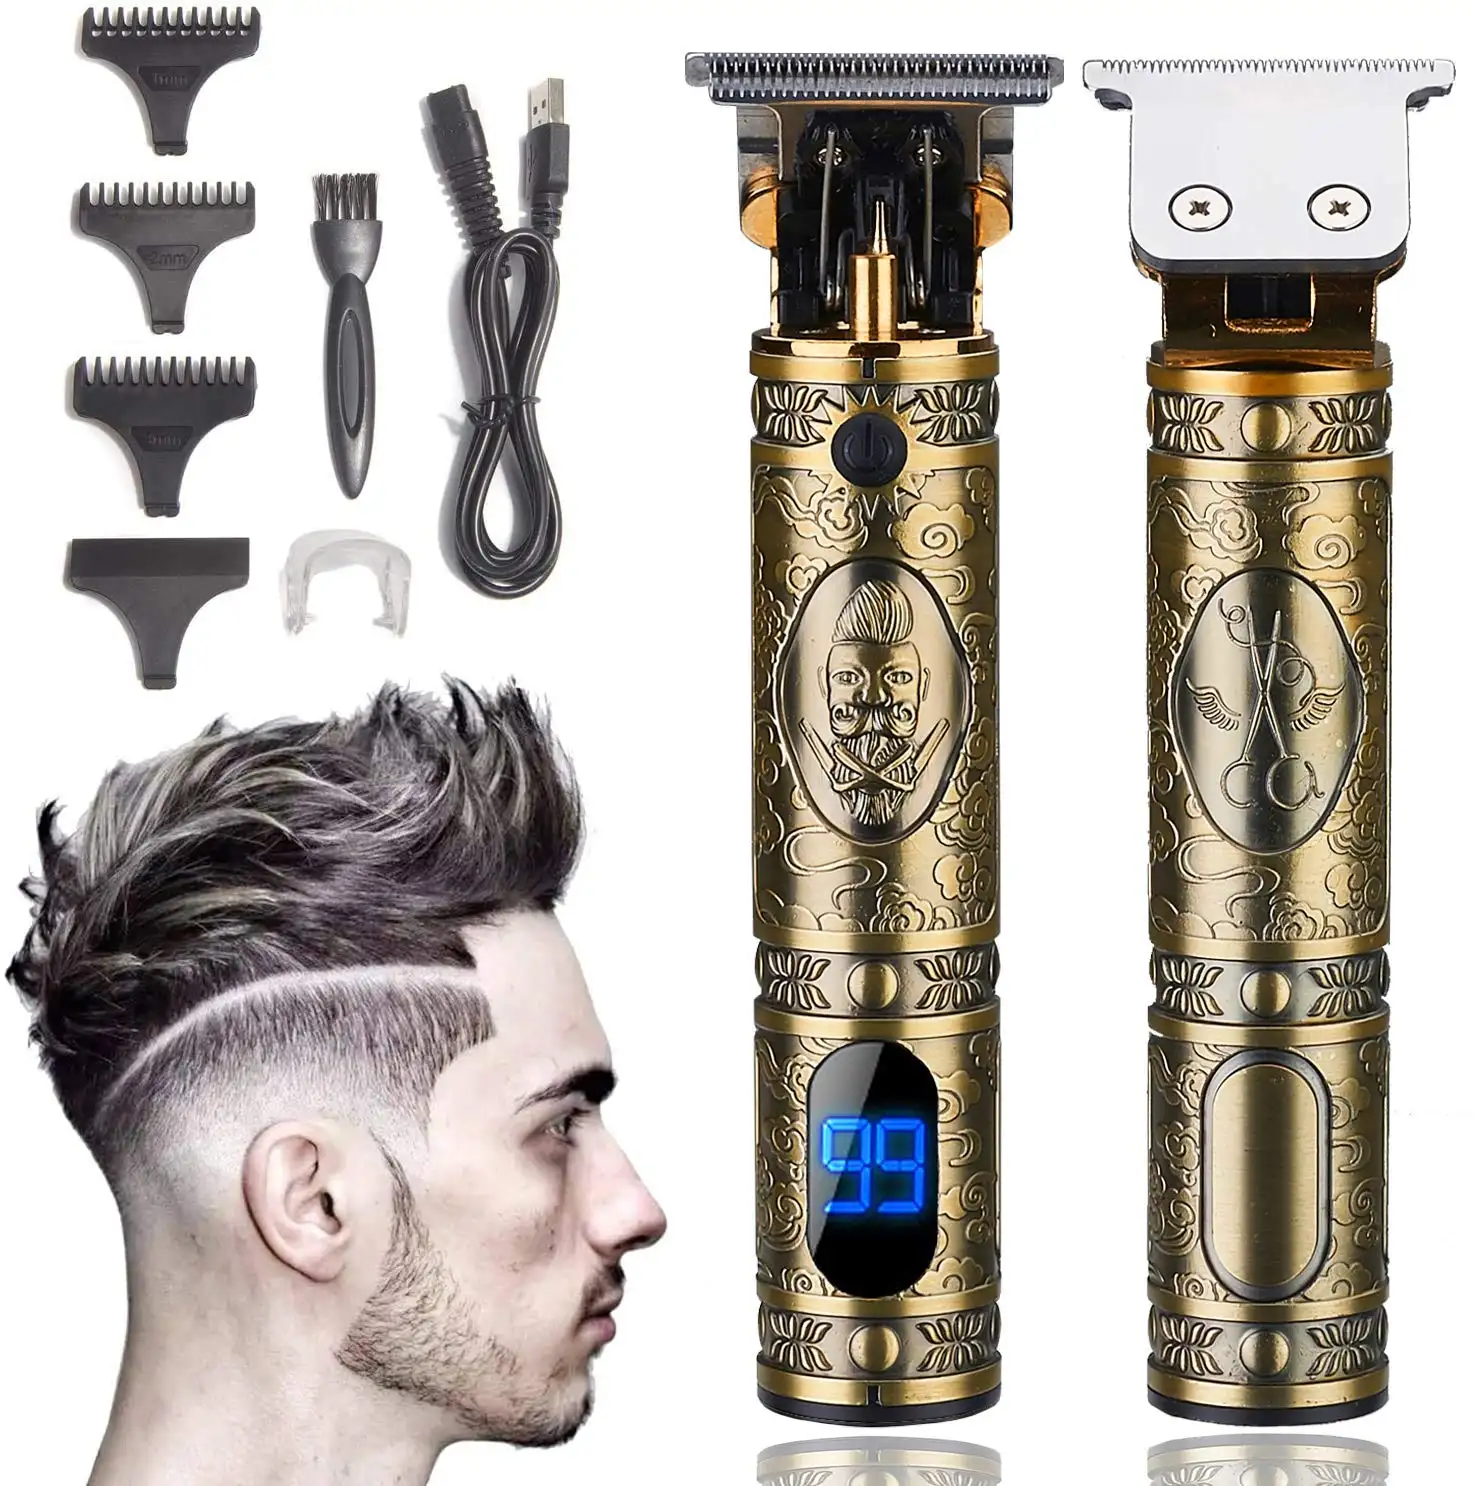 LANUMI Professional Barbershop supplies salon Ornate Electric Cordless Rechargeable 0mm cutting all metal beard Hair trimmers